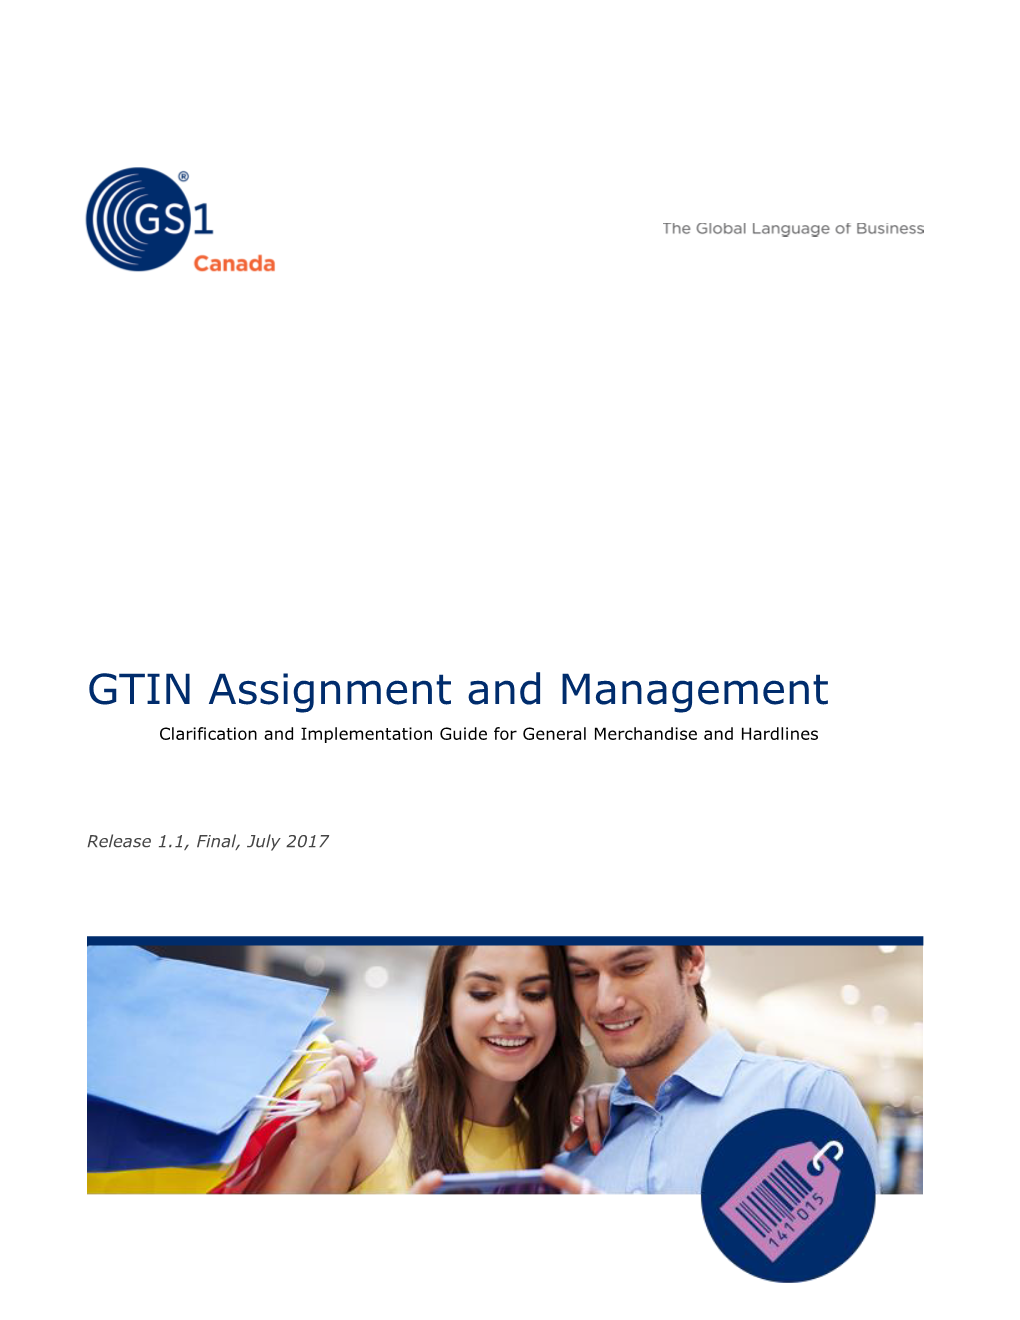 GTIN Assignment and Management Clarification and Implementation Guide for General Merchandise and Hardlines